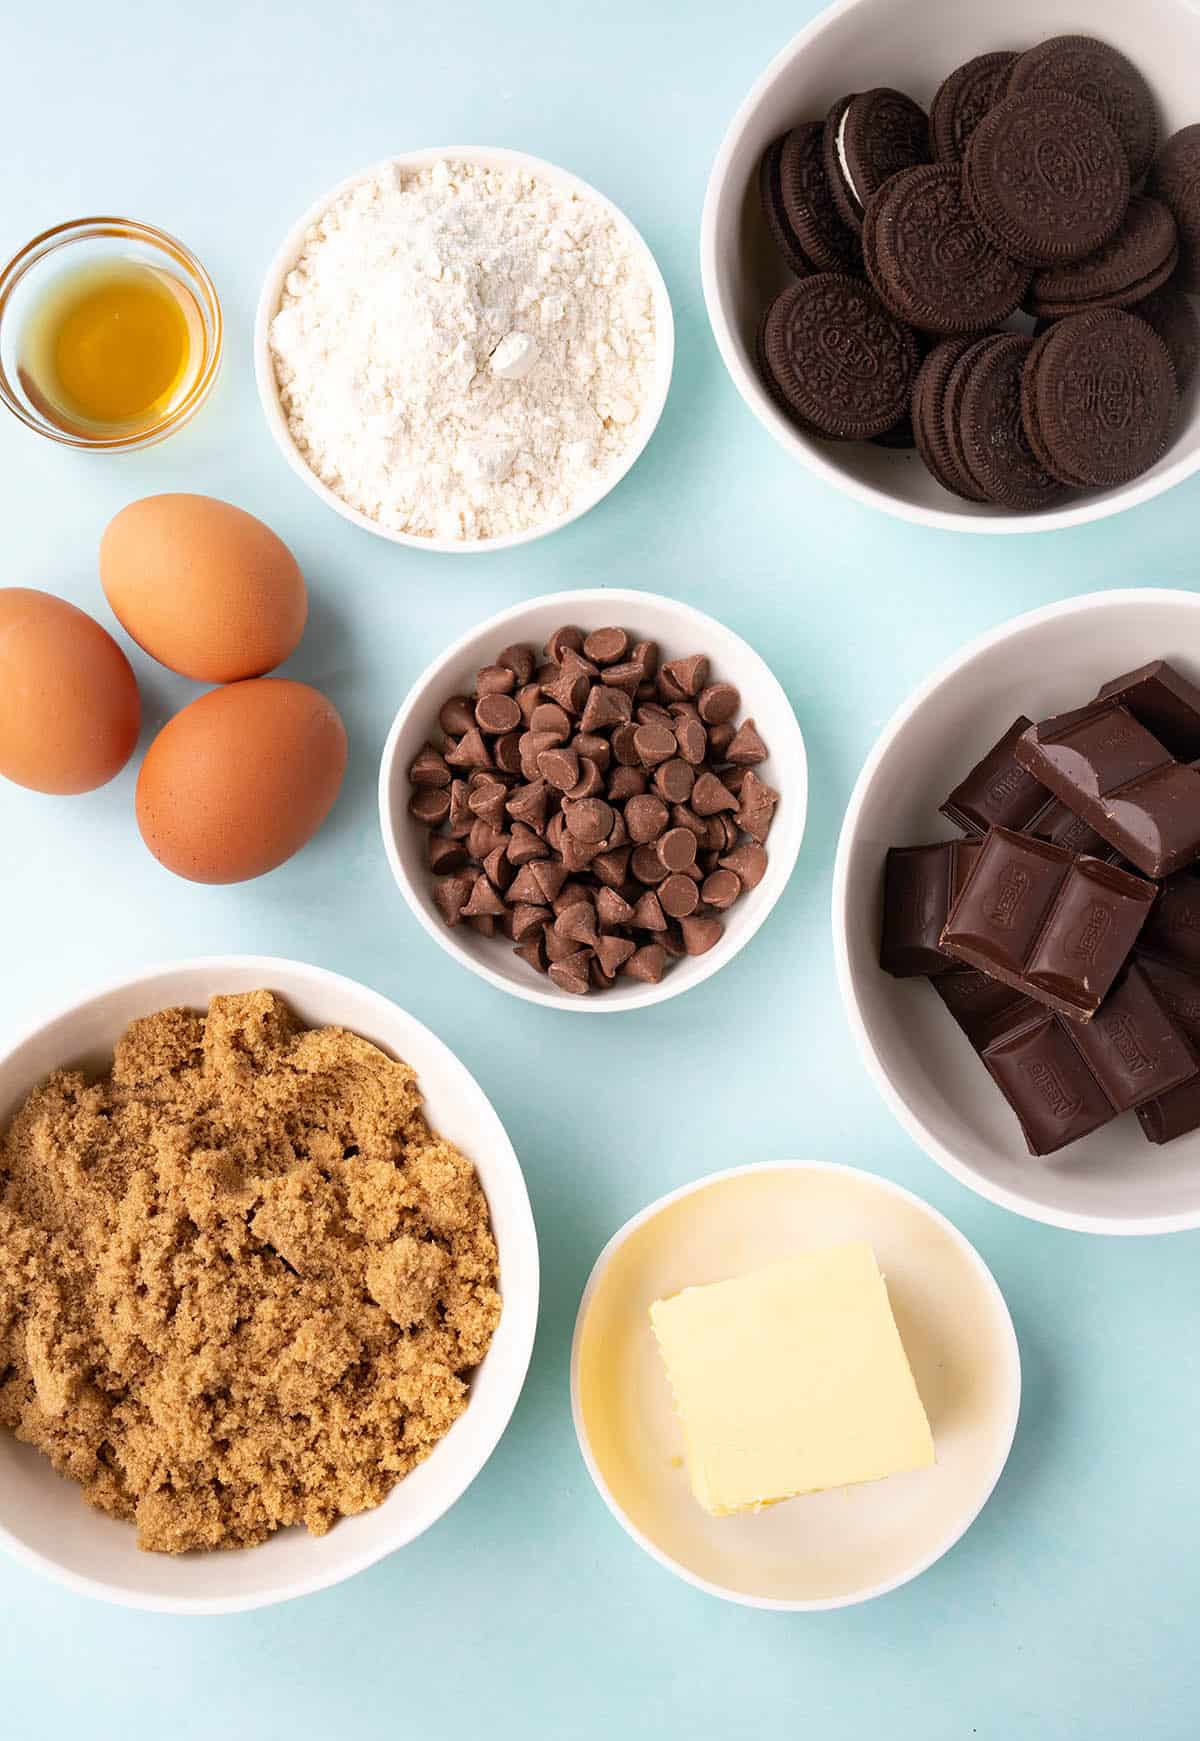 All the ingredients needed to make brownies from scratch on a blue background.